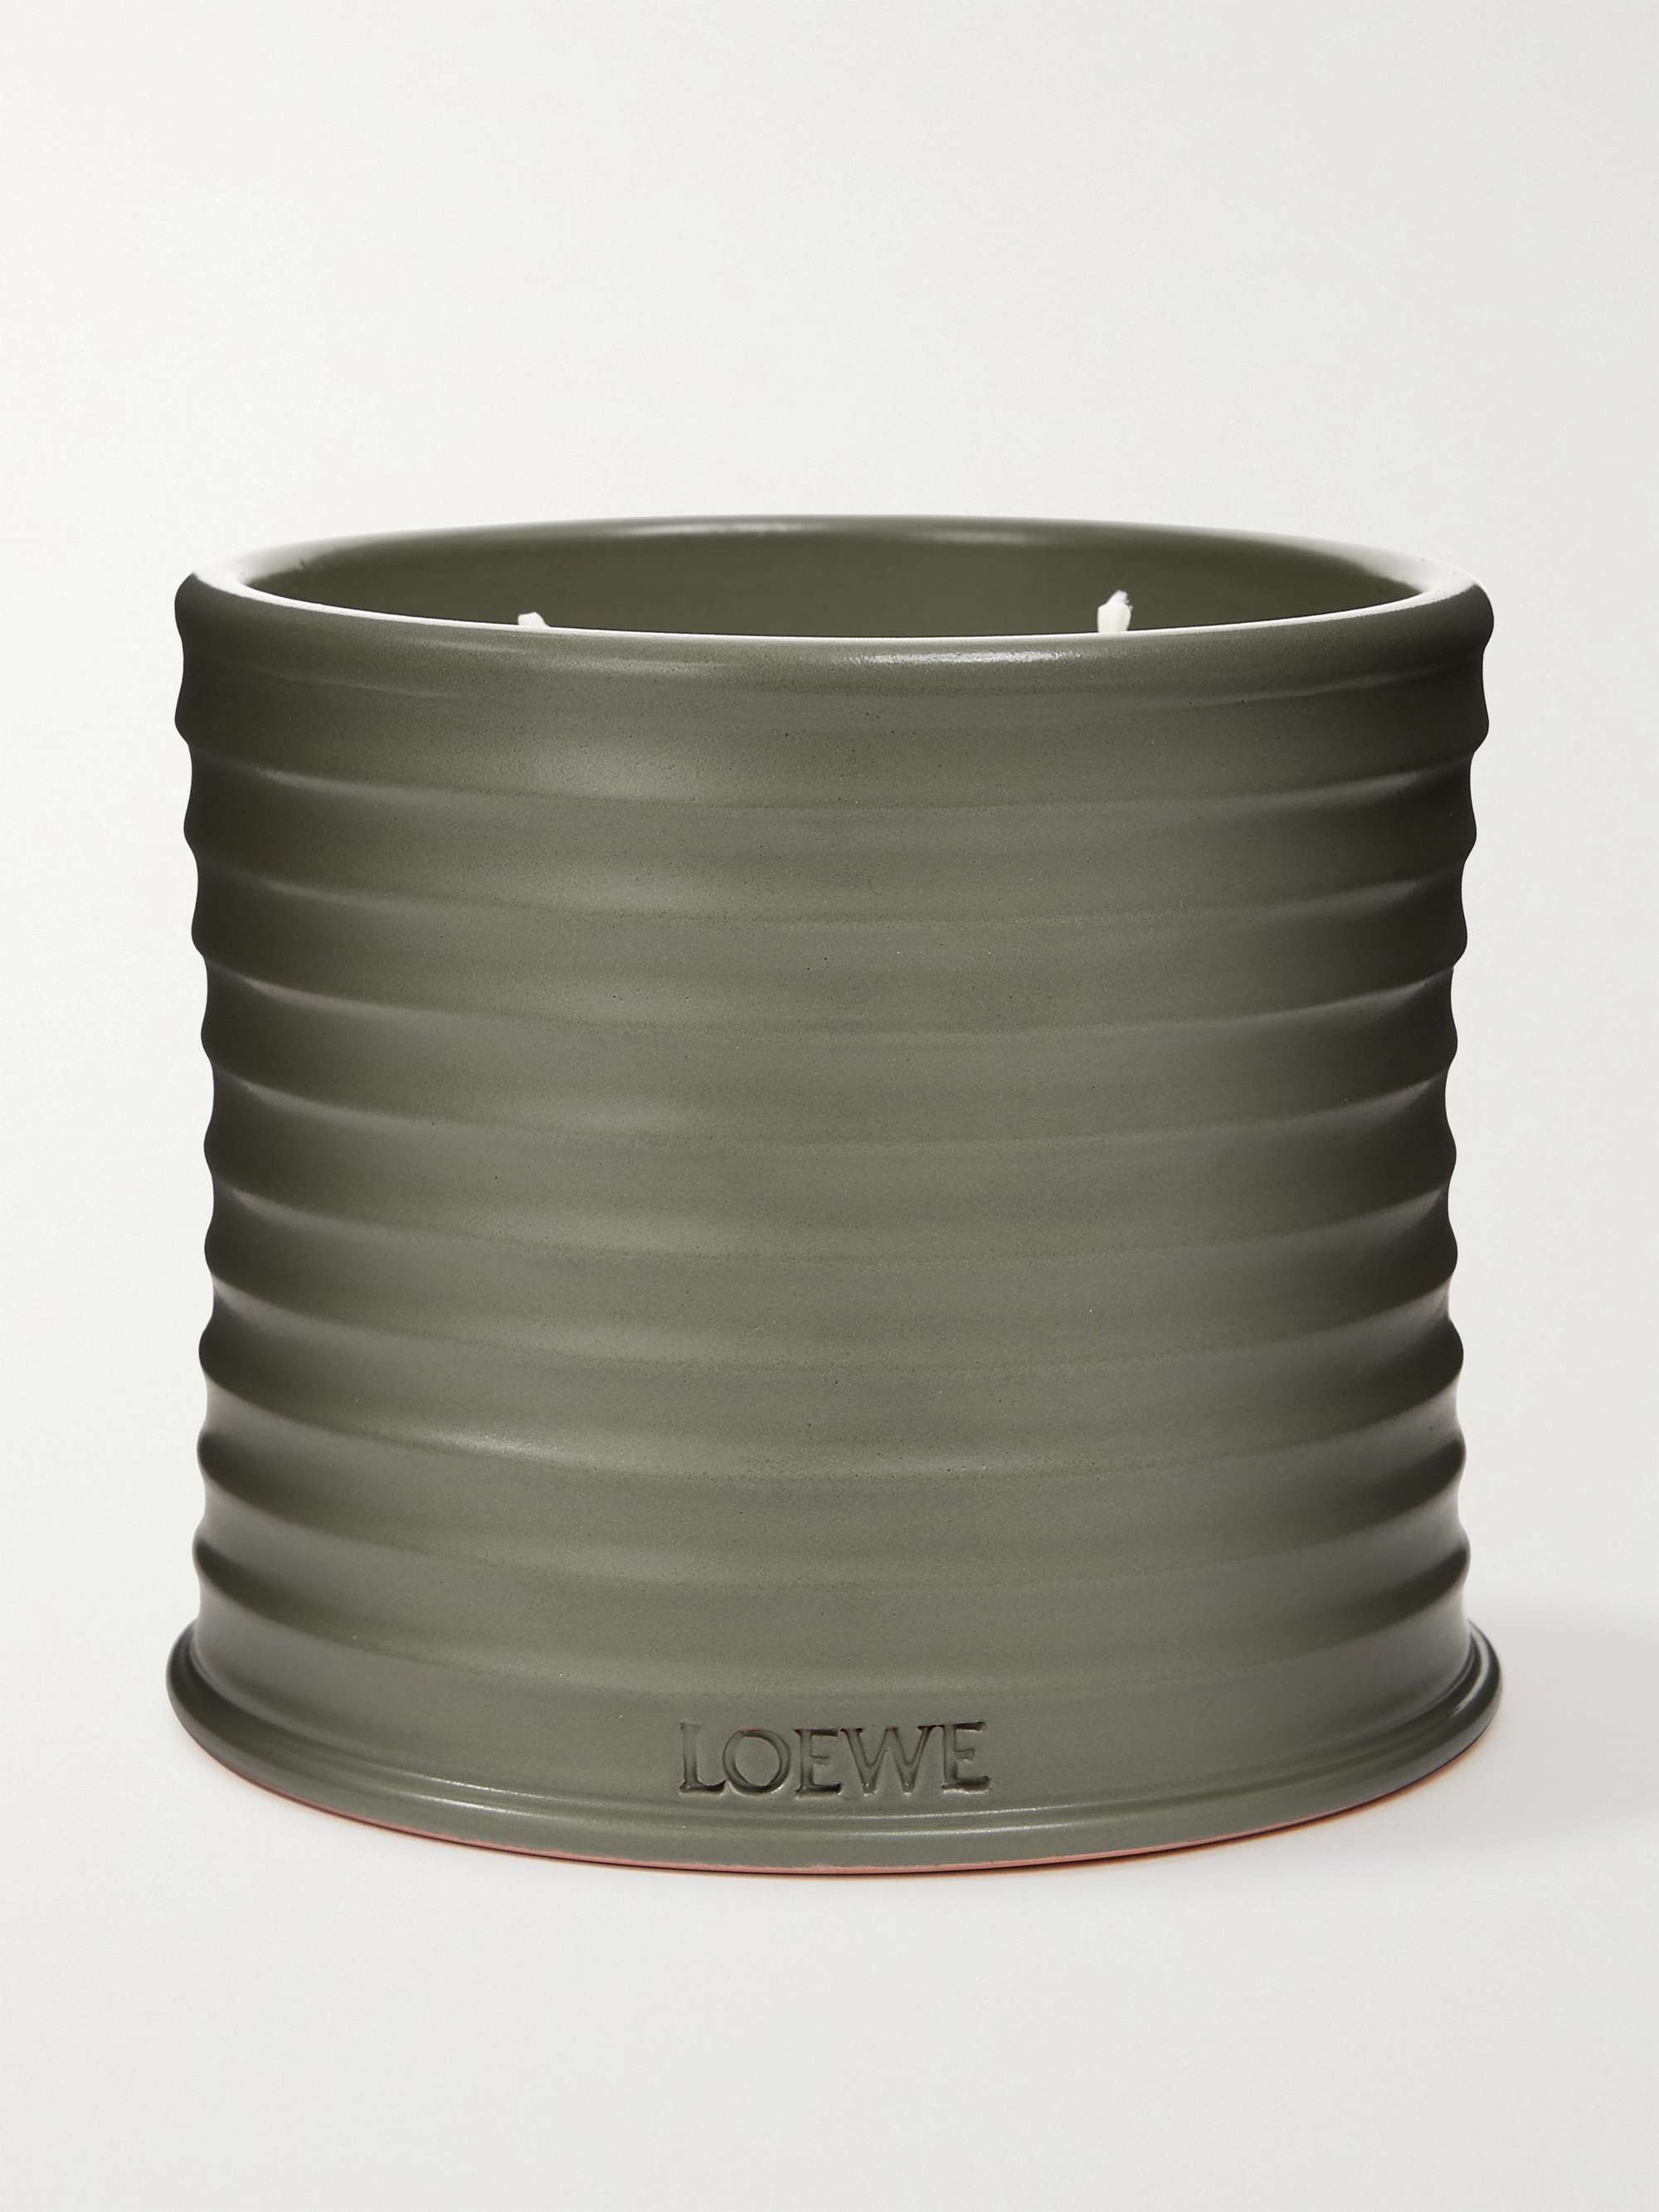 LOEWE HOME SCENTS Marihuana Scented Candle, 170g